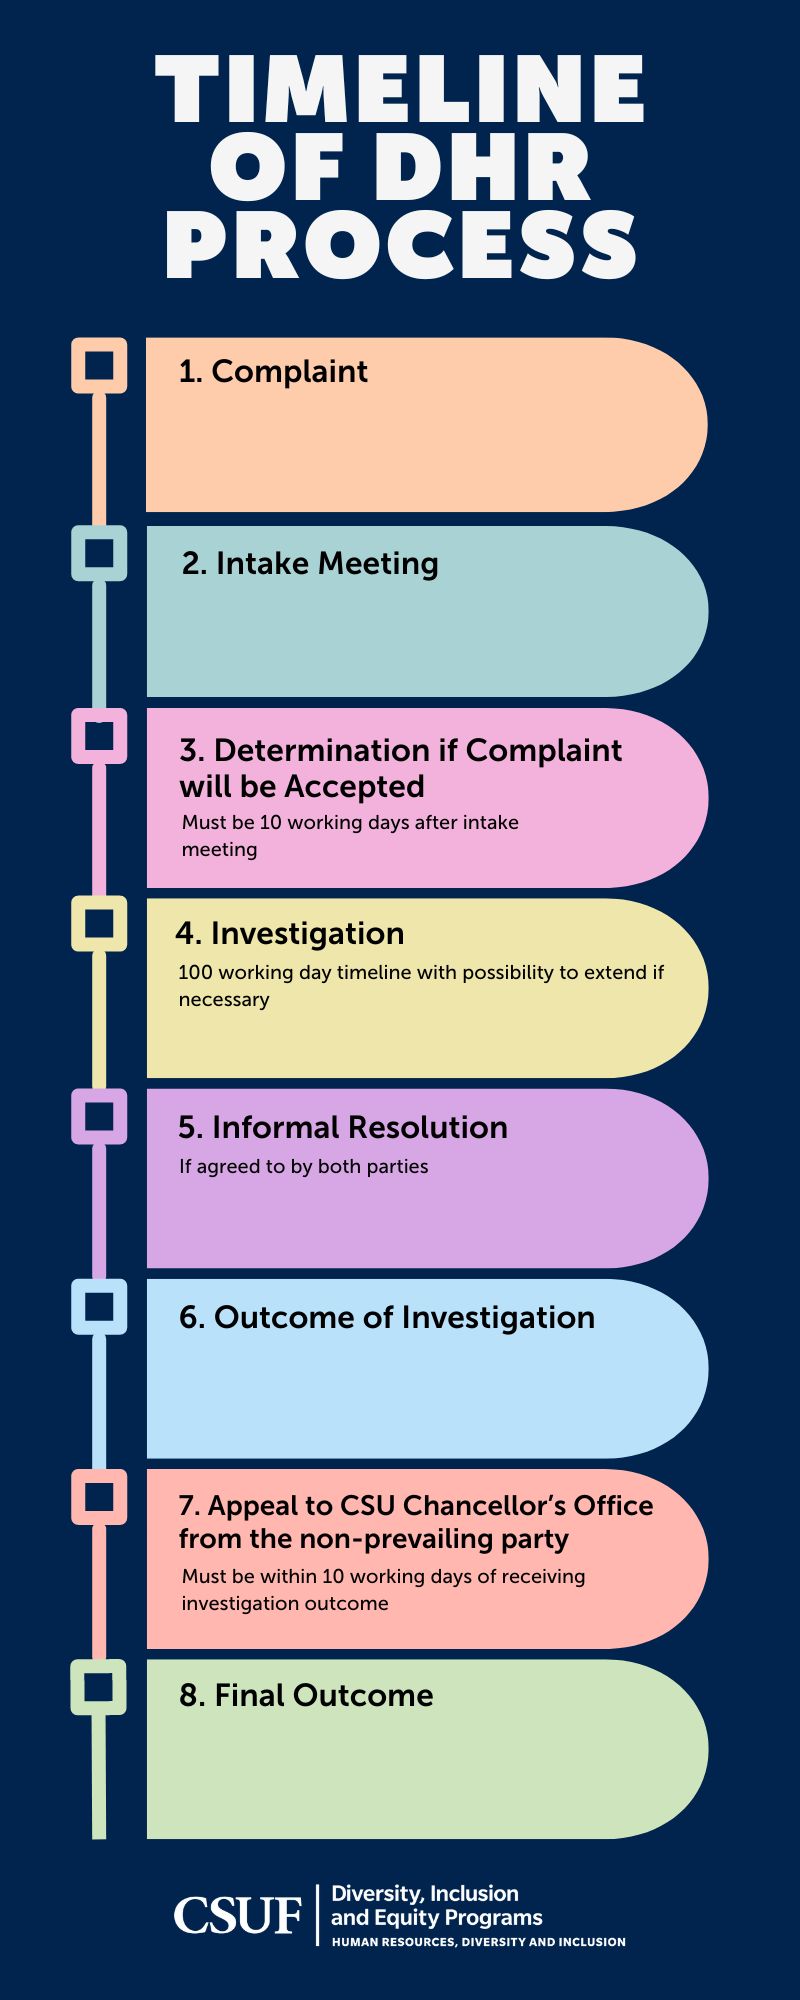 Timeline of DHR Process: Complaint Intake Meeting Determination if Complaint will be Accepted (must be 10 working days after intake meeting) Investigation (100 working day timeline with possibility to extend if necessary) Informal Resolution (if agreed to by both parties) Outcome of Investigation Appeal to CSU Chancellor’s Office from non-prevailing party (must be within 10 working days of receiving investigation outcome) Final Outcome  CSUF Diversity, Inclusion and Equity Programs. Human Resources, Diversity and Inclusion